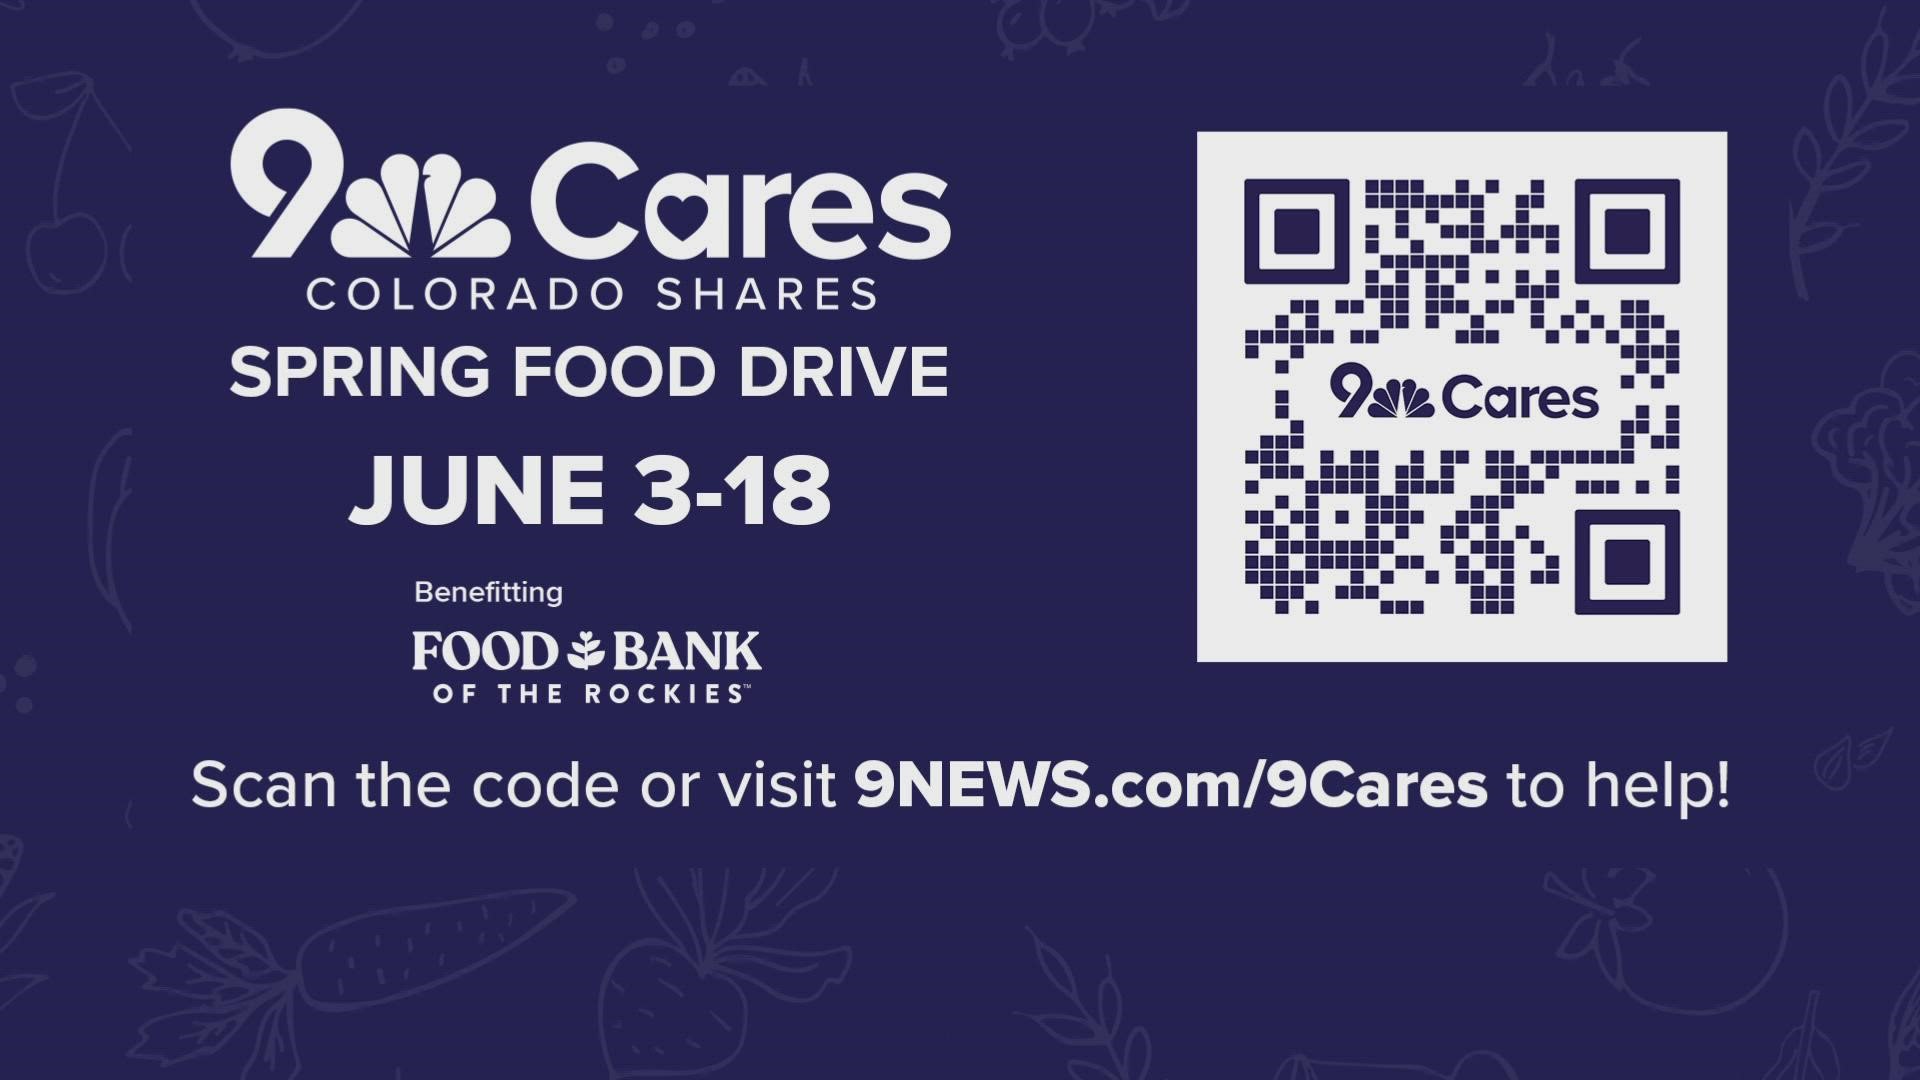 Help us fill the food banks and pantries in our community with an online or nonperishable food donation in our 9Cares spring food drive.